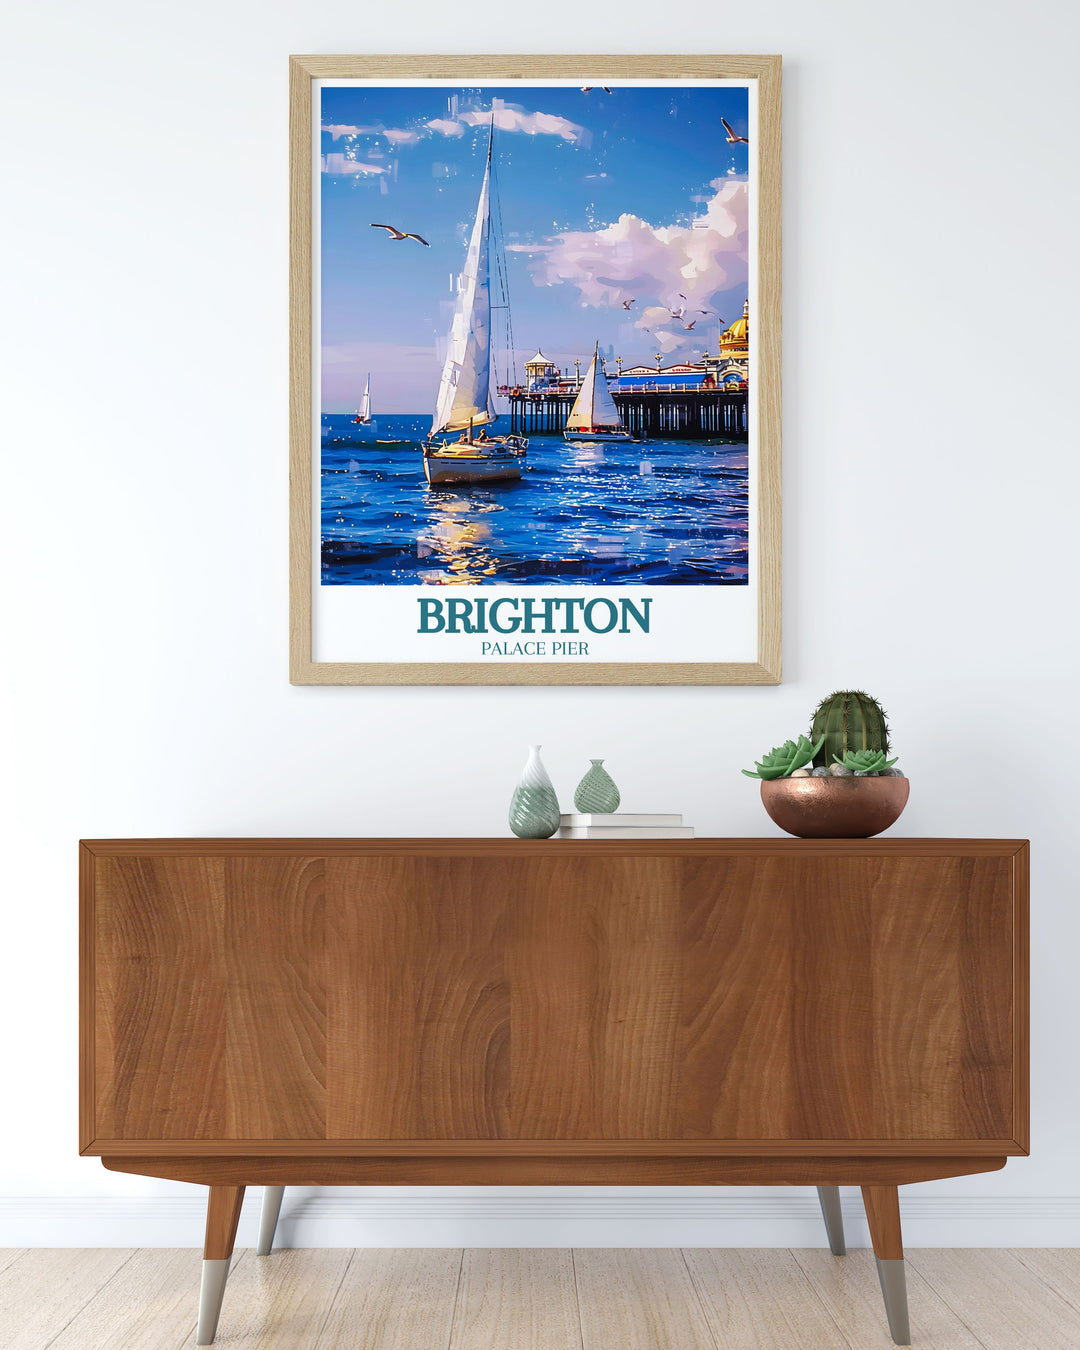 Art Deco print of Brighton Beach with the stunning English Channel in the background, a beautiful retro travel poster that adds a touch of elegance and charm to any room.